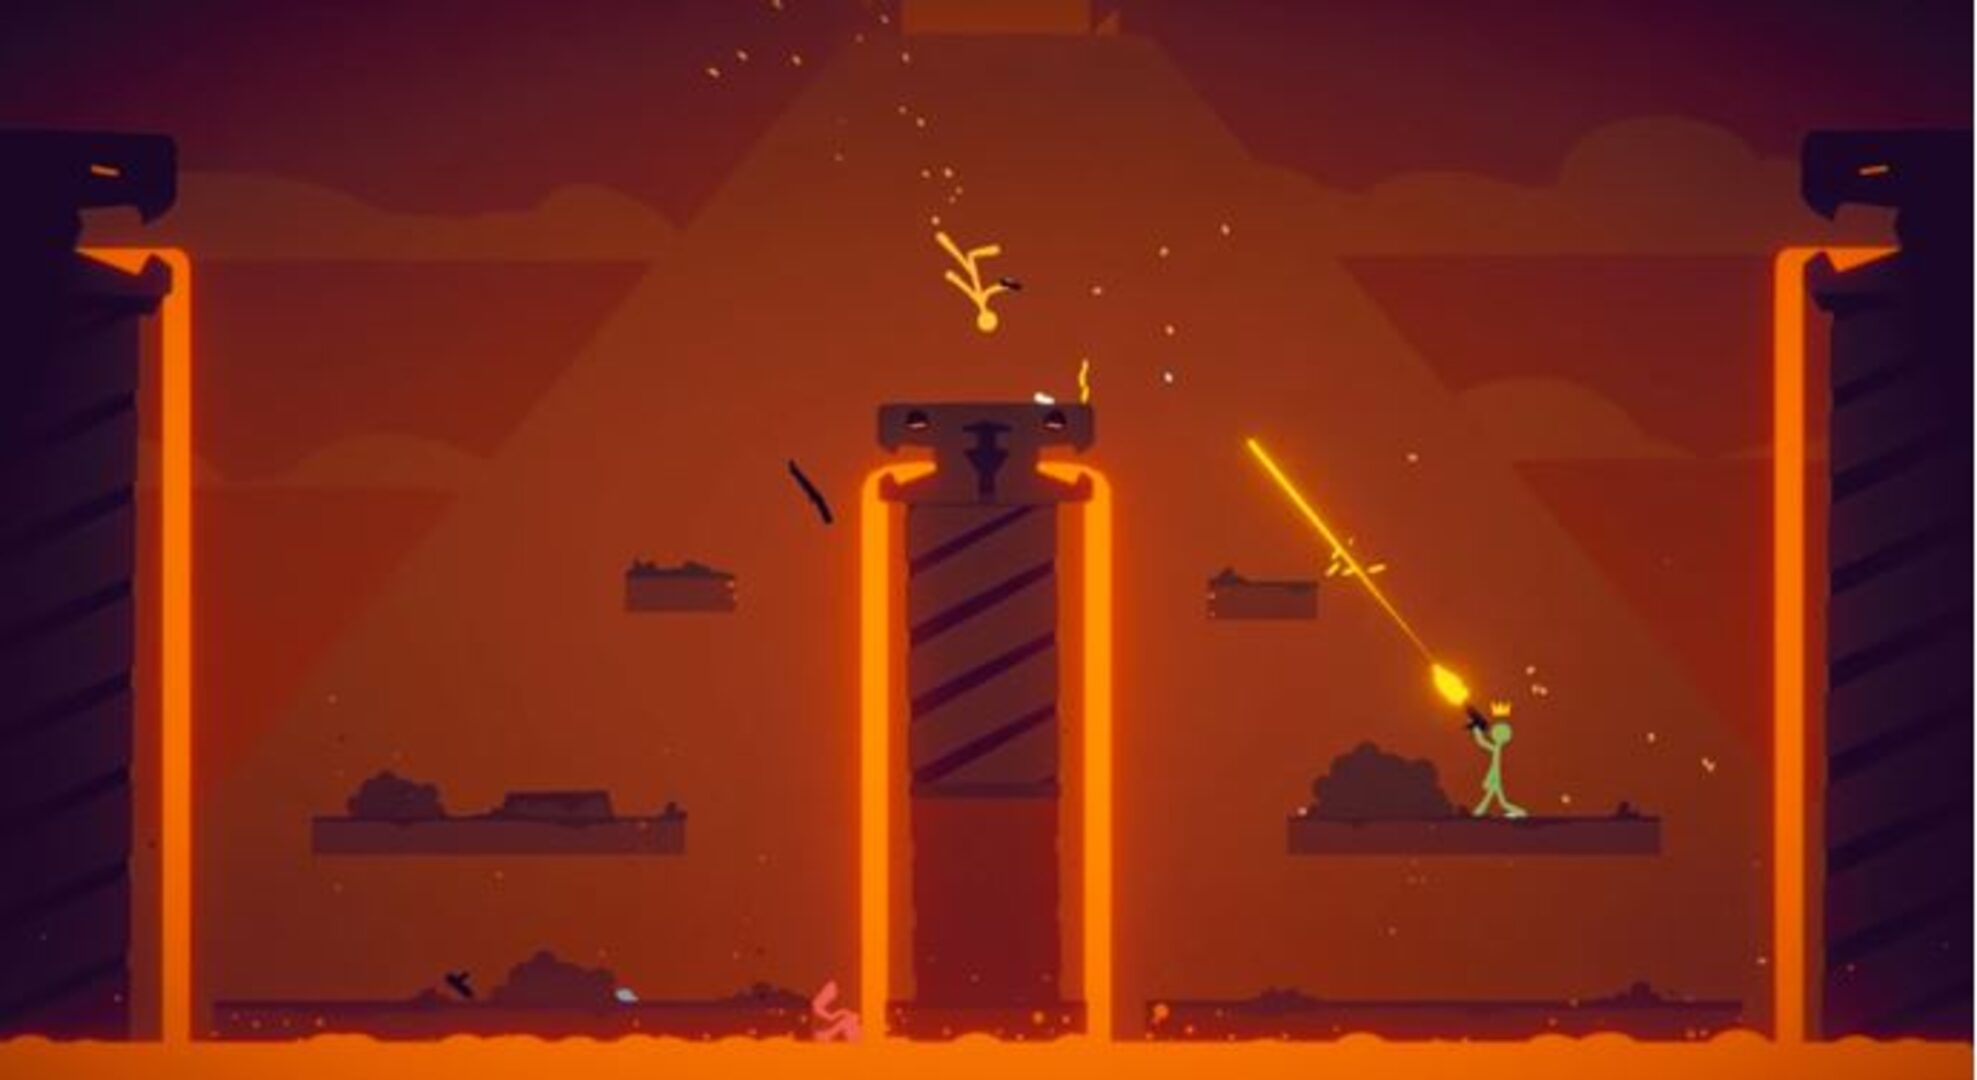 Get a free serial key for Stick Fight: The Game on Steam